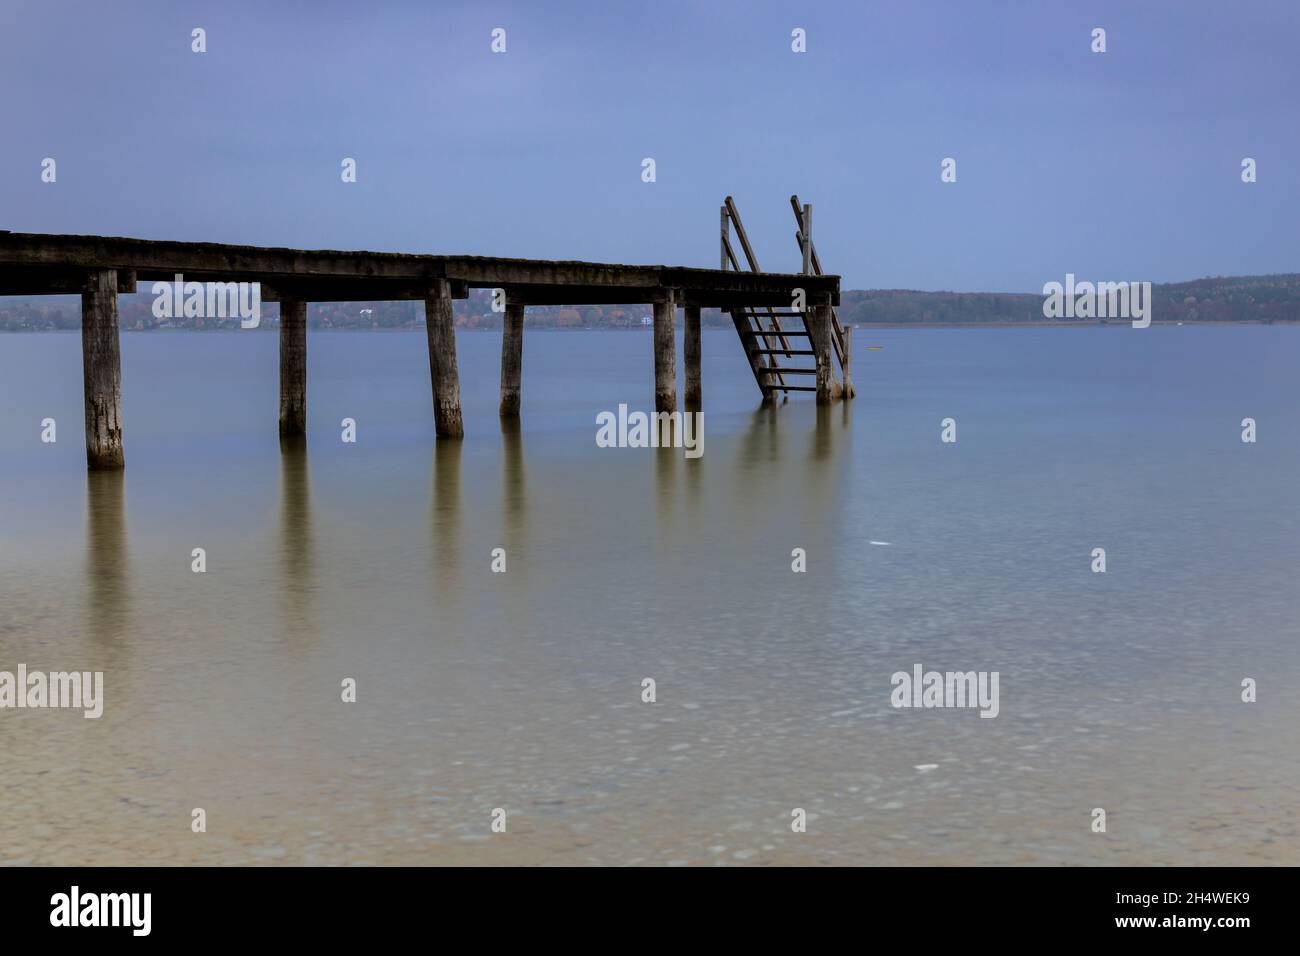 Cloudy evening at Lake Ammersee, Bavaria, Germany Stock Photo